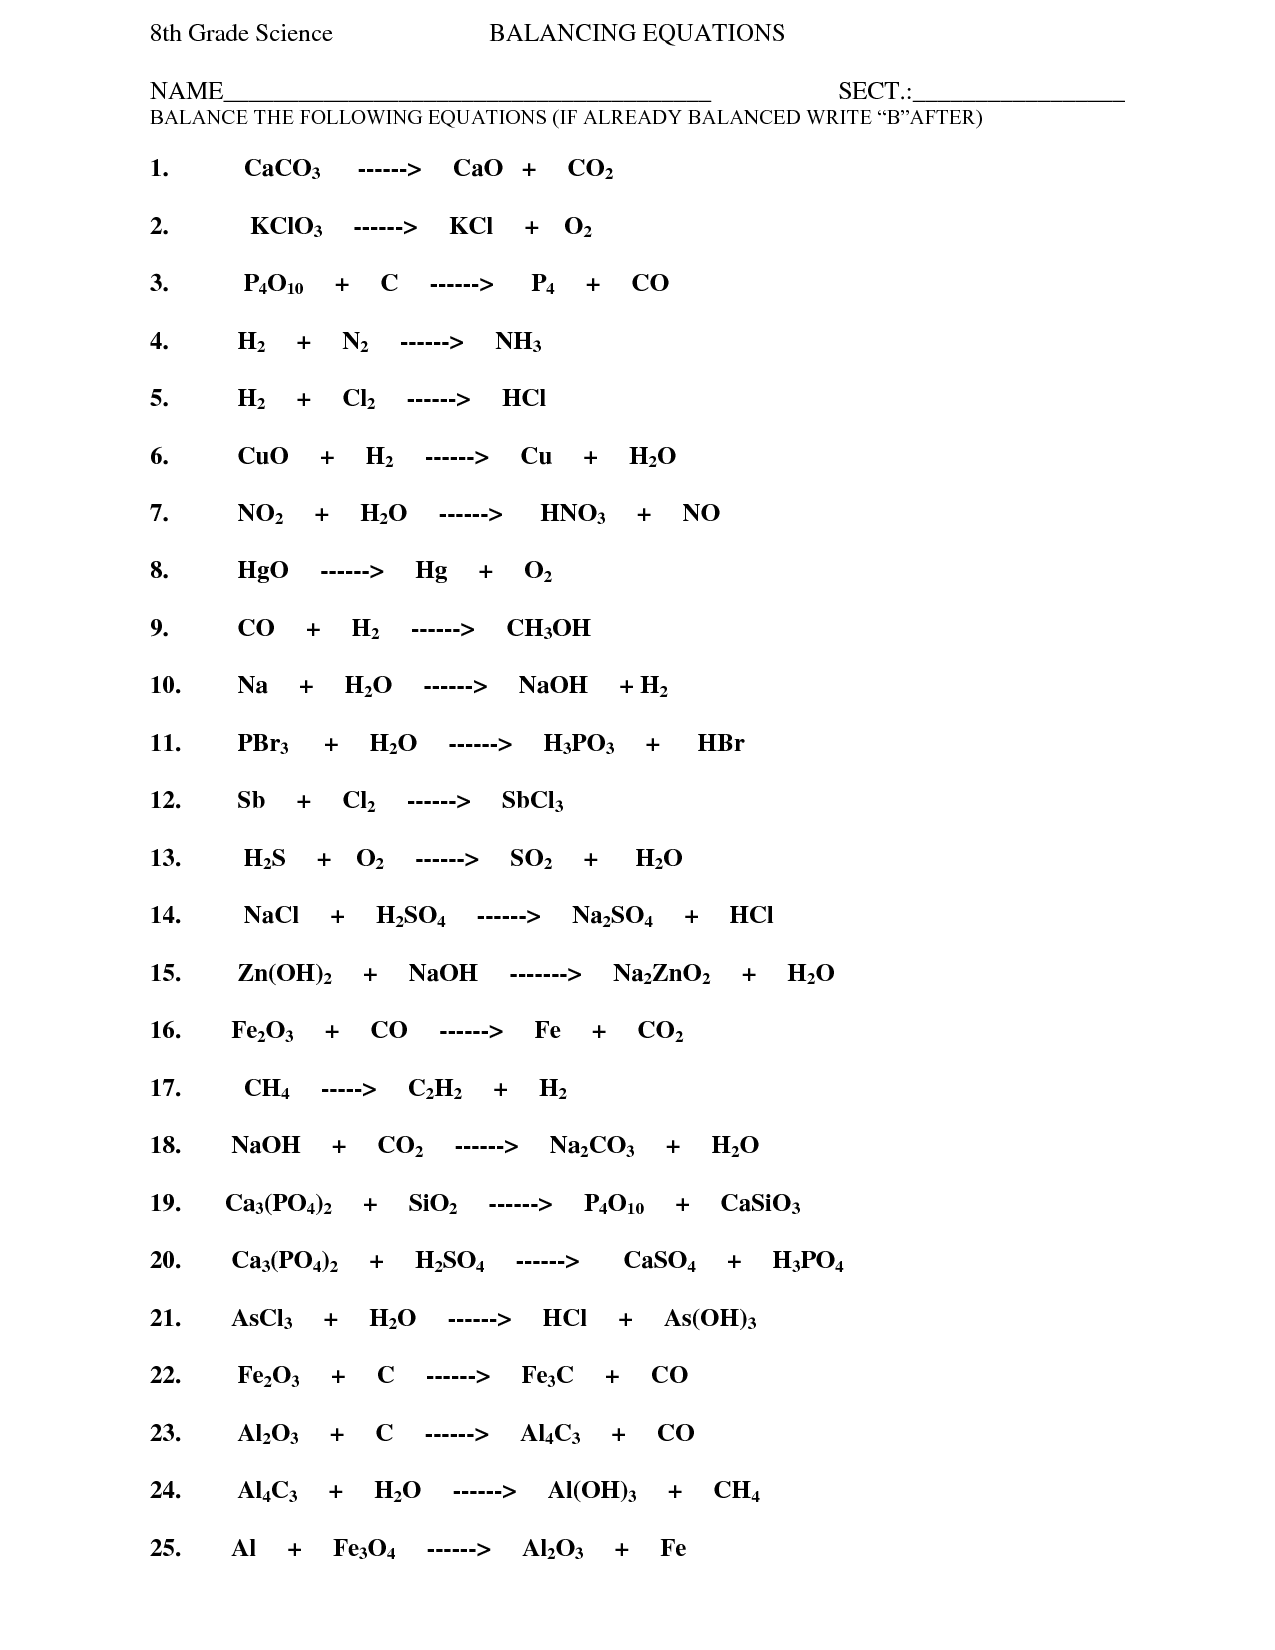 6-best-images-of-balancing-chemical-equations-worksheet-easy-balancing